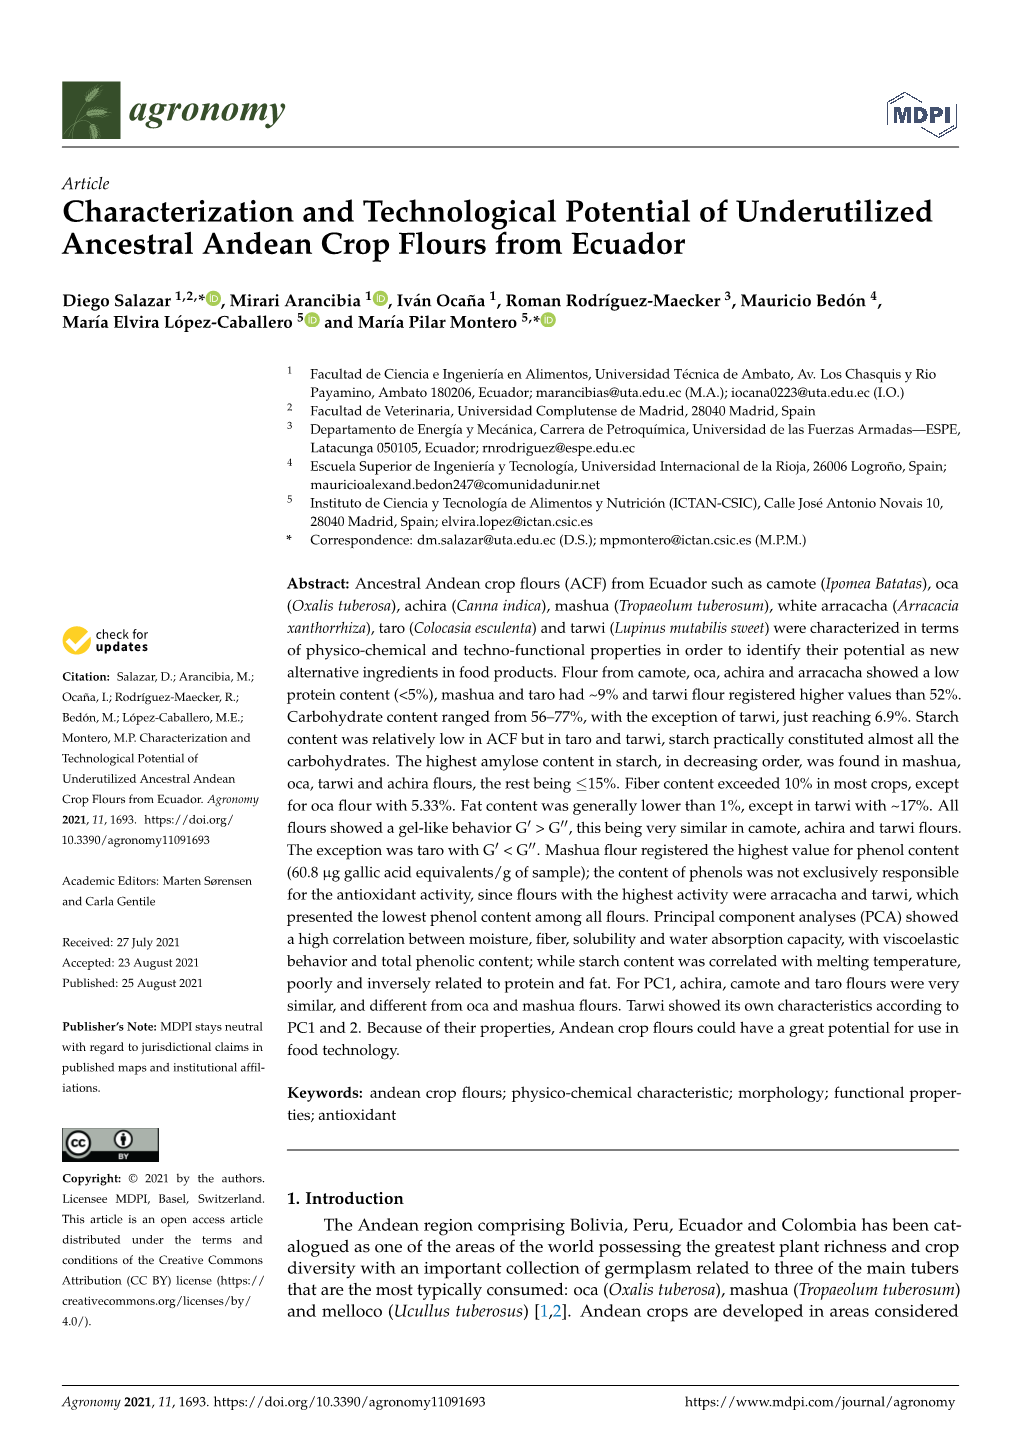 Characterization and Technological Potential of Underutilized Ancestral Andean Crop Flours from Ecuador